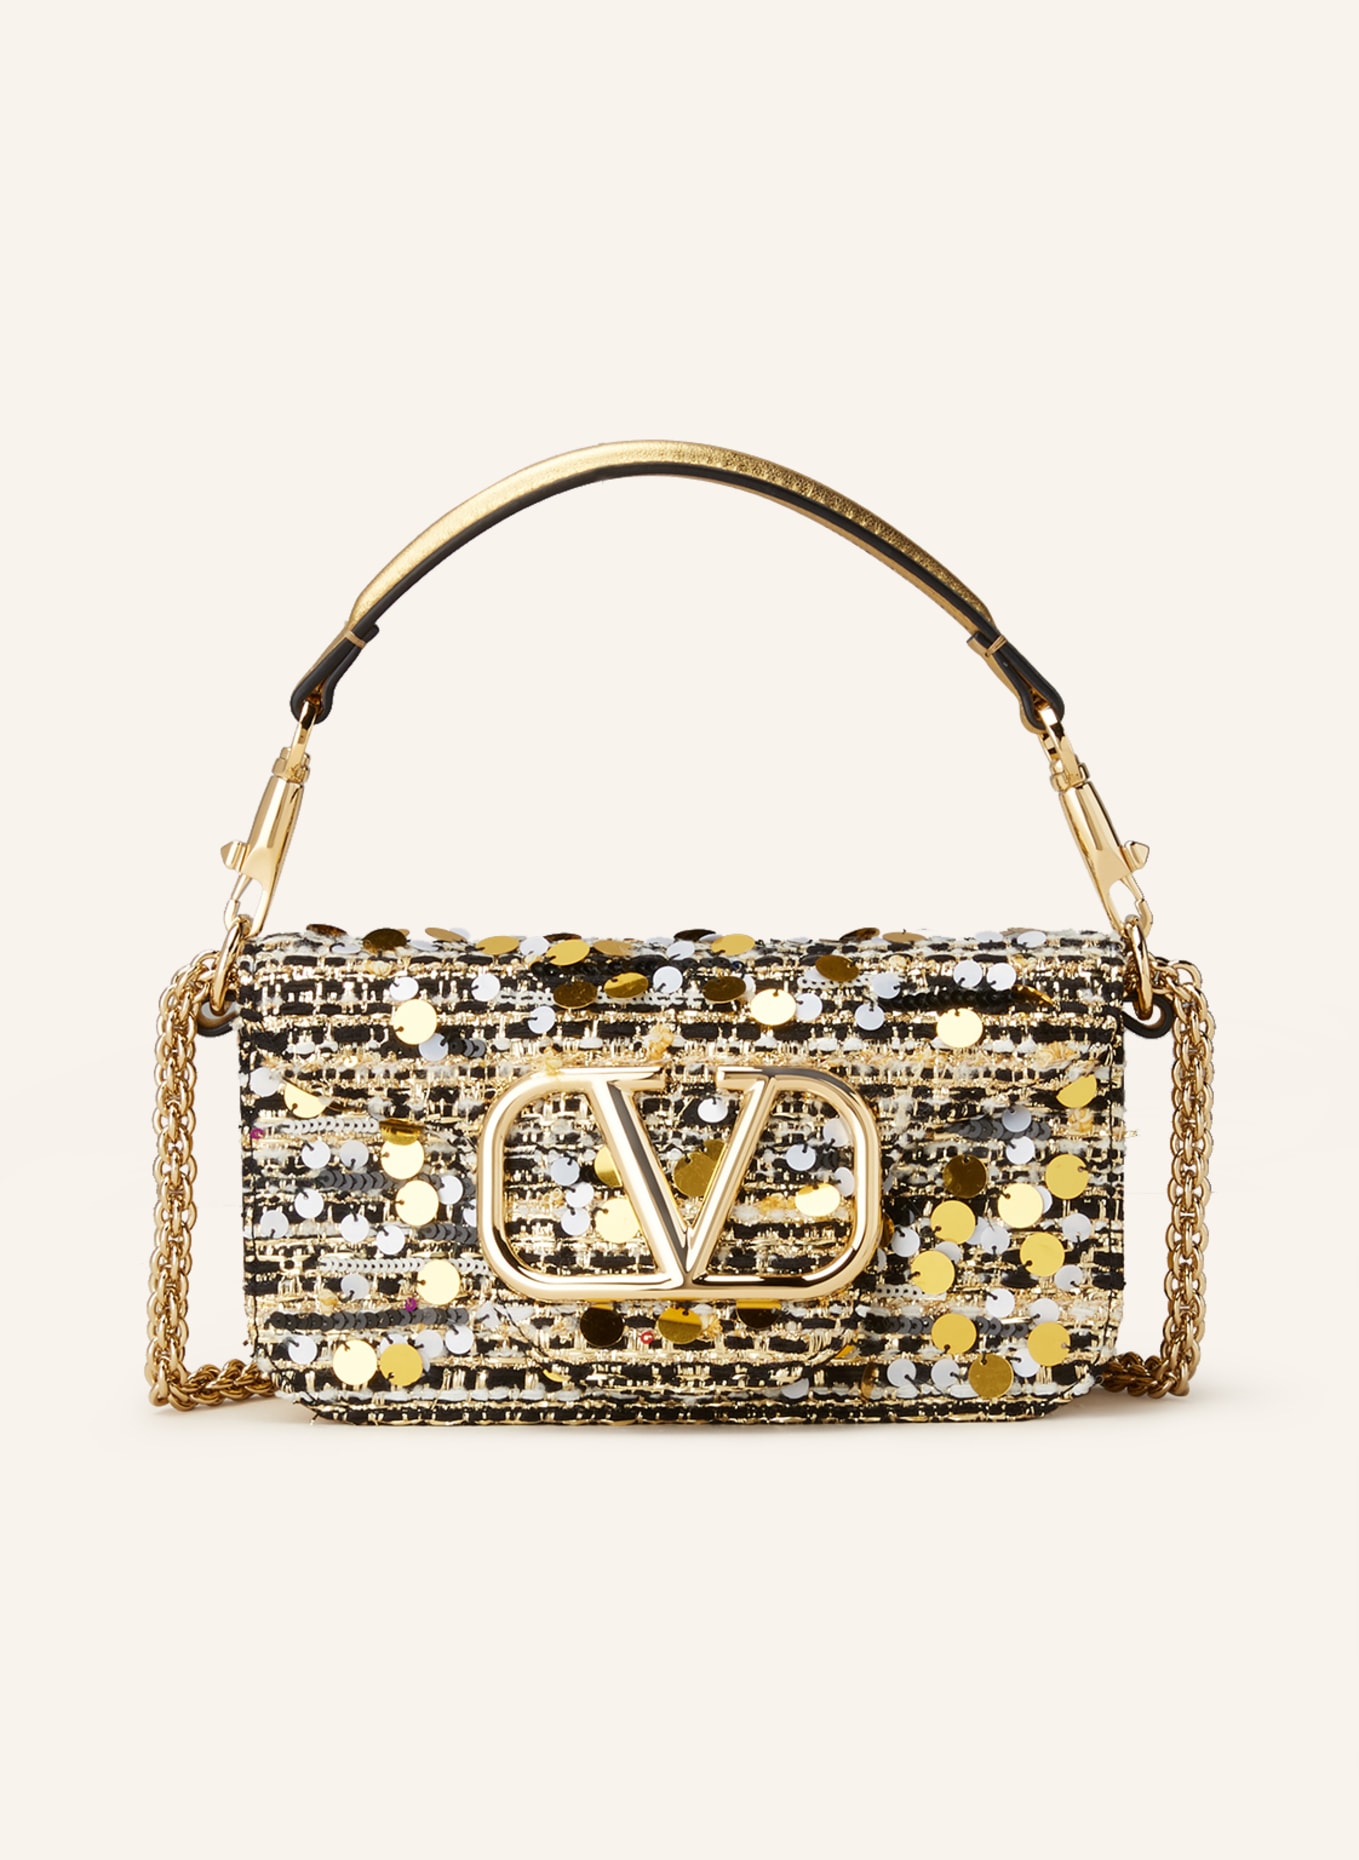 Women's Valentino Garavani Clutches and evening bags from $690